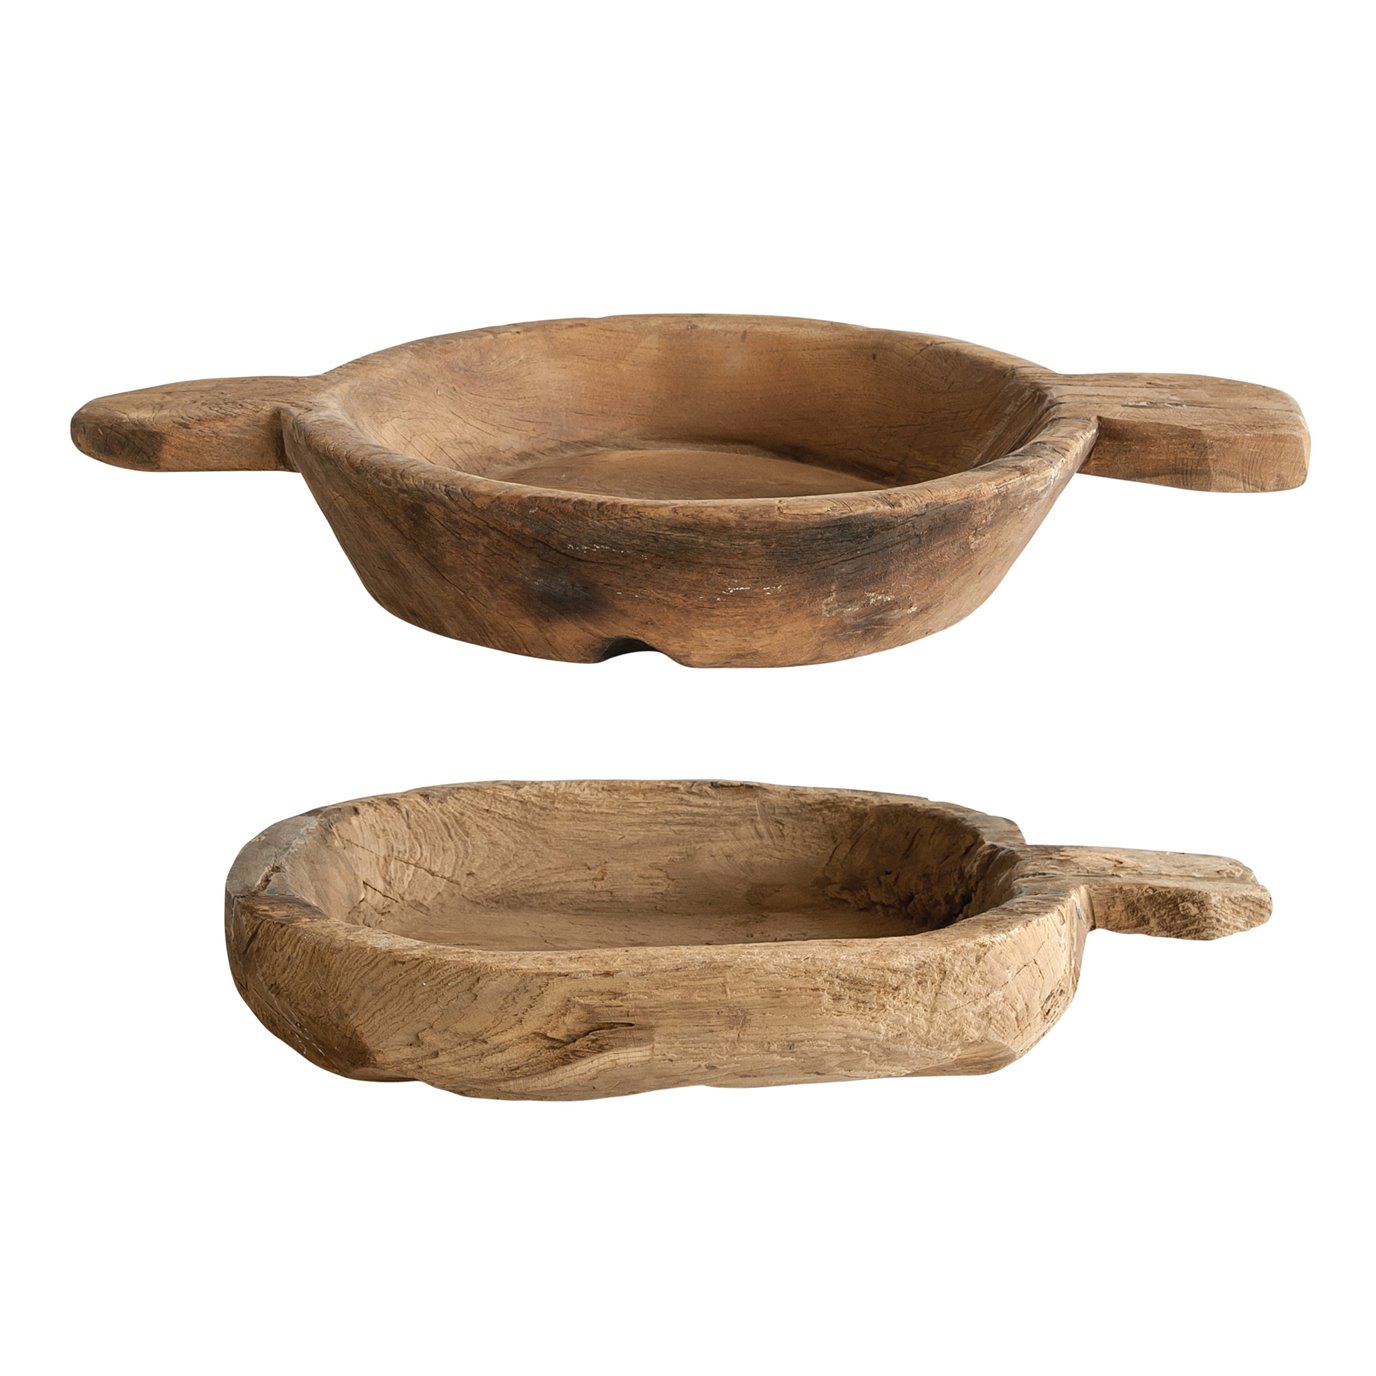 Found Decorative Brown Wood Bowl (Each one will vary)